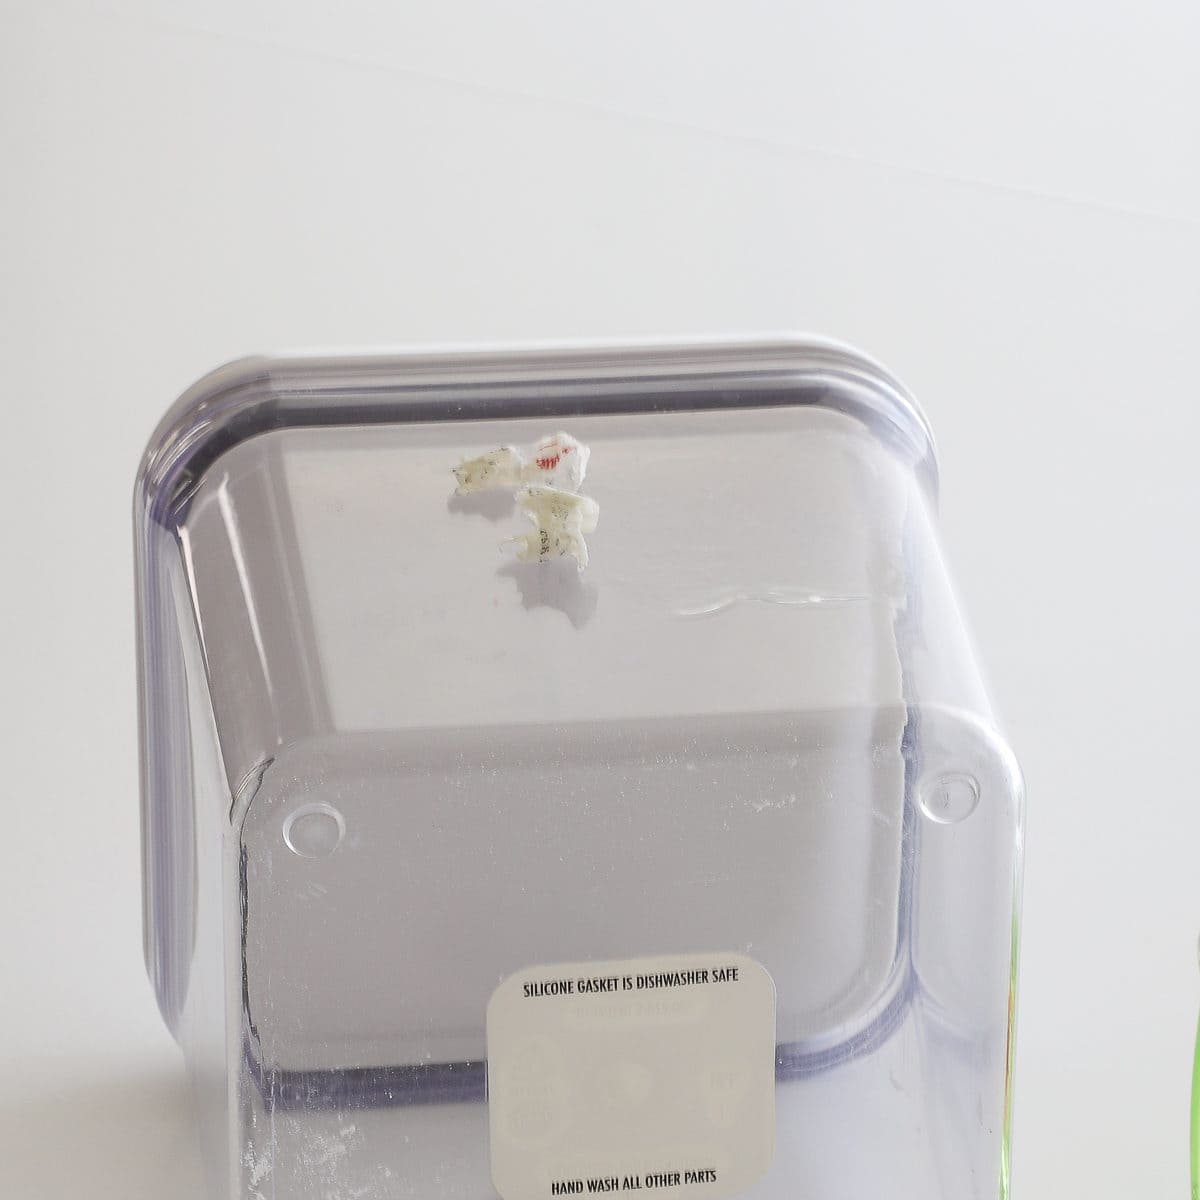 A clear container with paper sticker peeled up removed